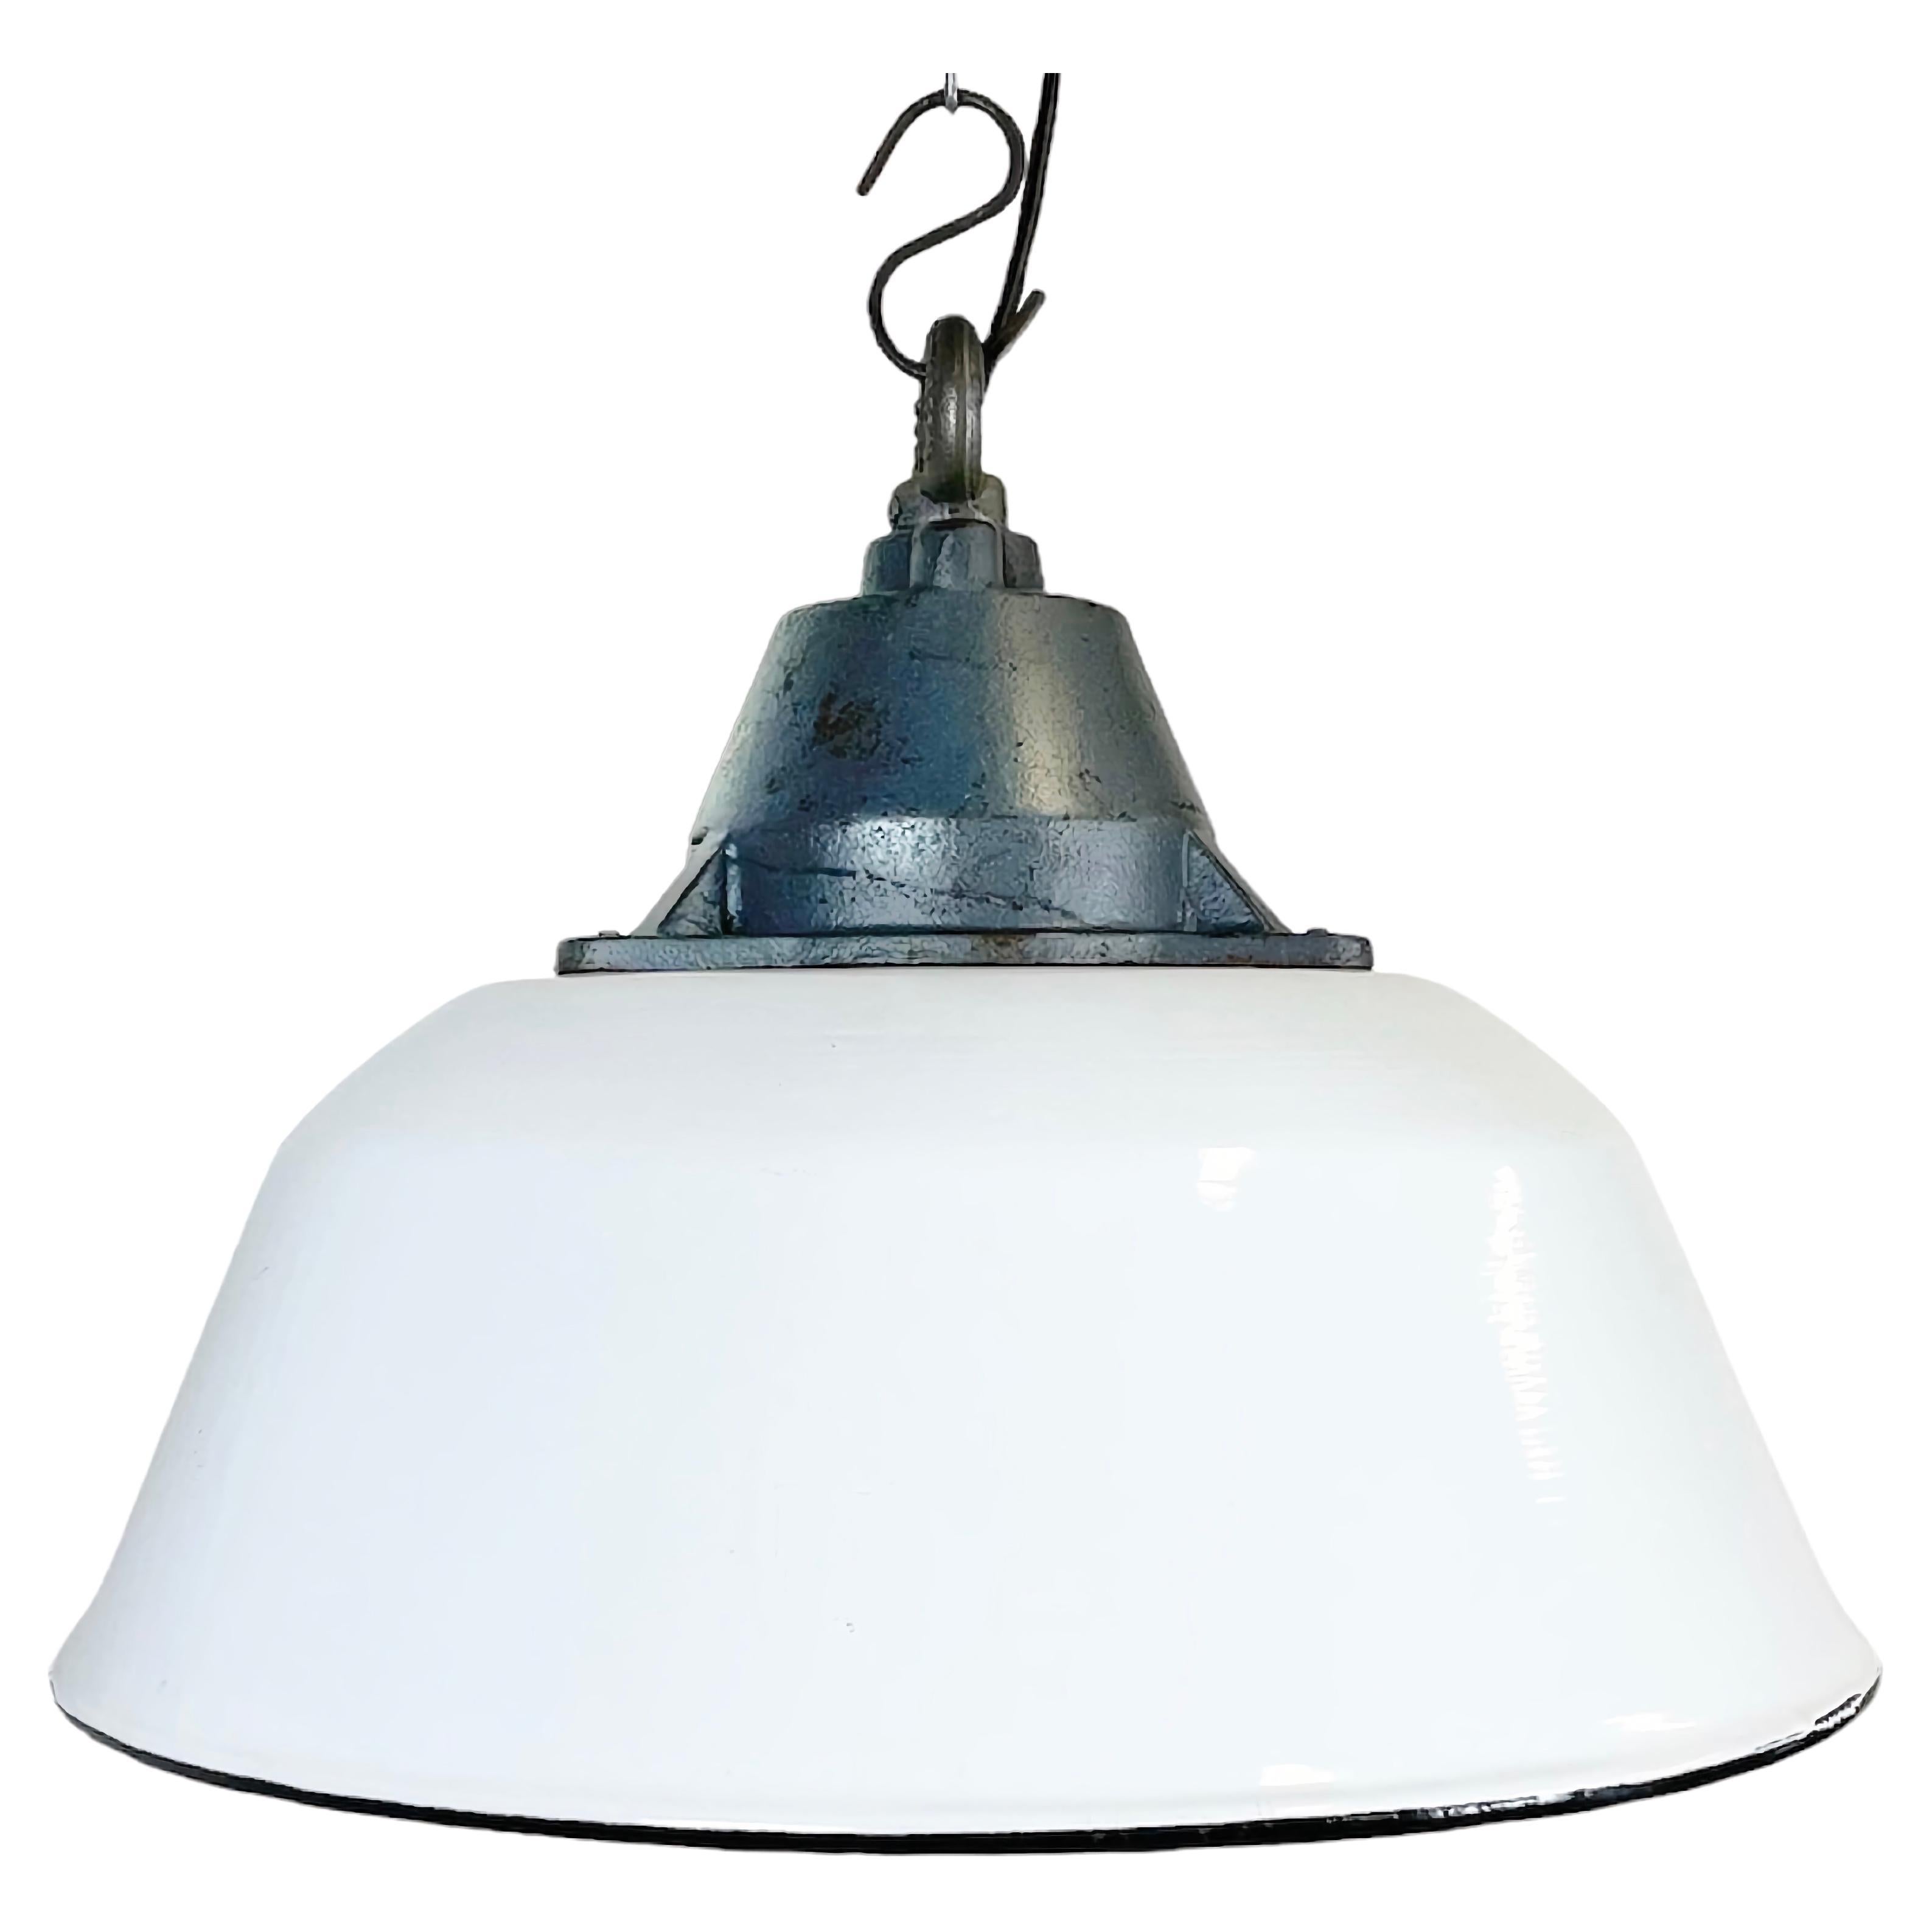 White Enamel and Cast Iron Industrial Pendant Light, 1960s For Sale